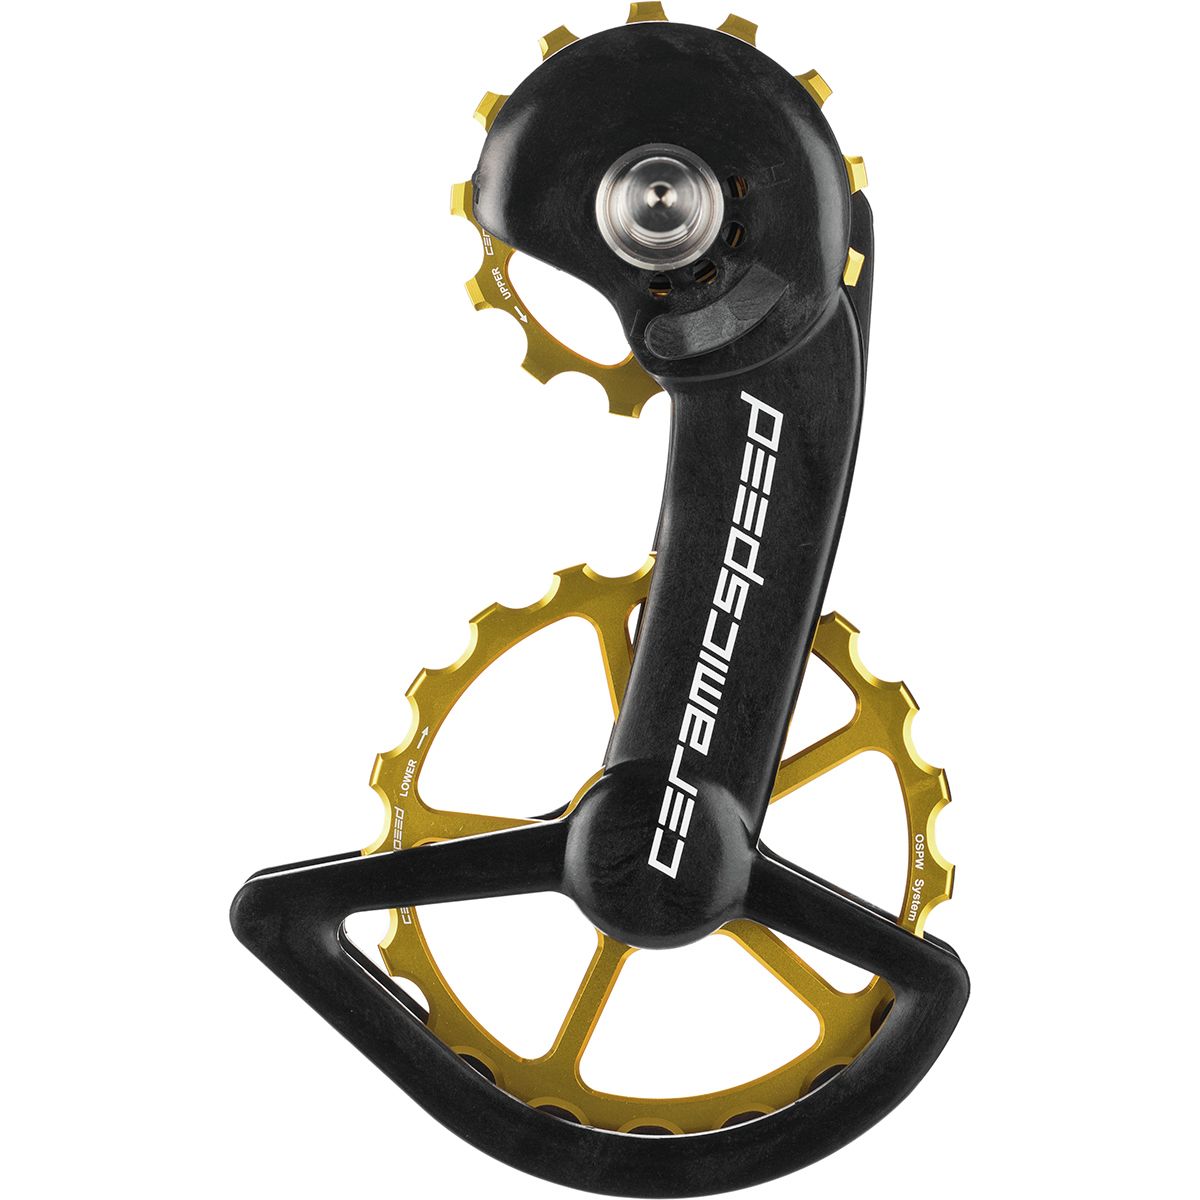 CeramicSpeed Oversized Pulley Wheel System - Limited Edition Gold